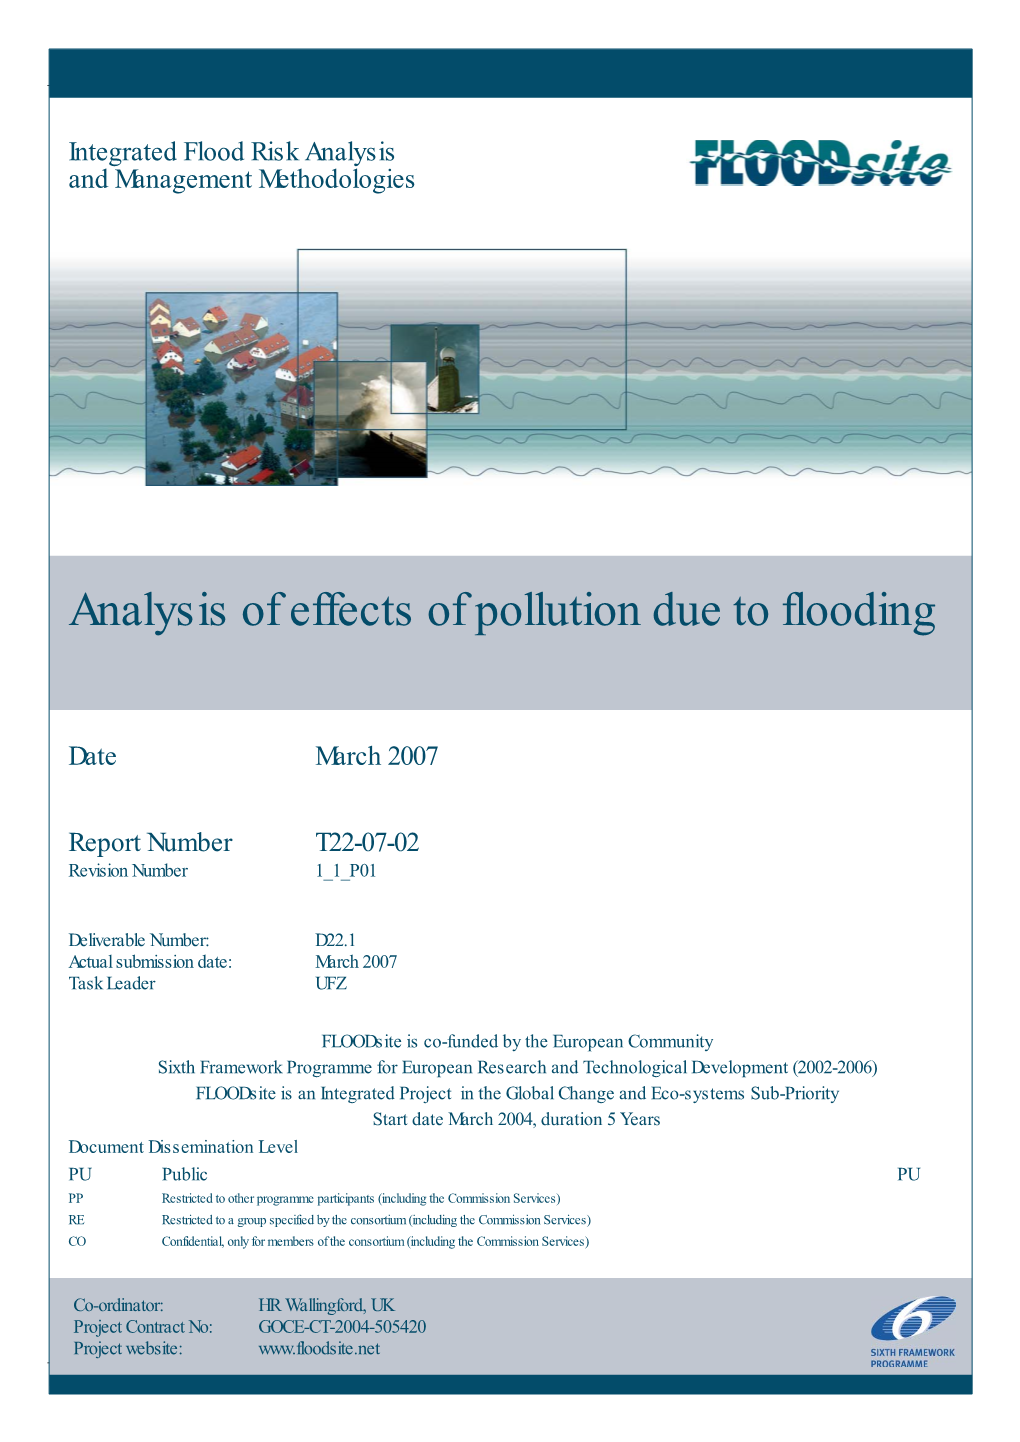 Analysis of Effects of Pollution Due to Flooding